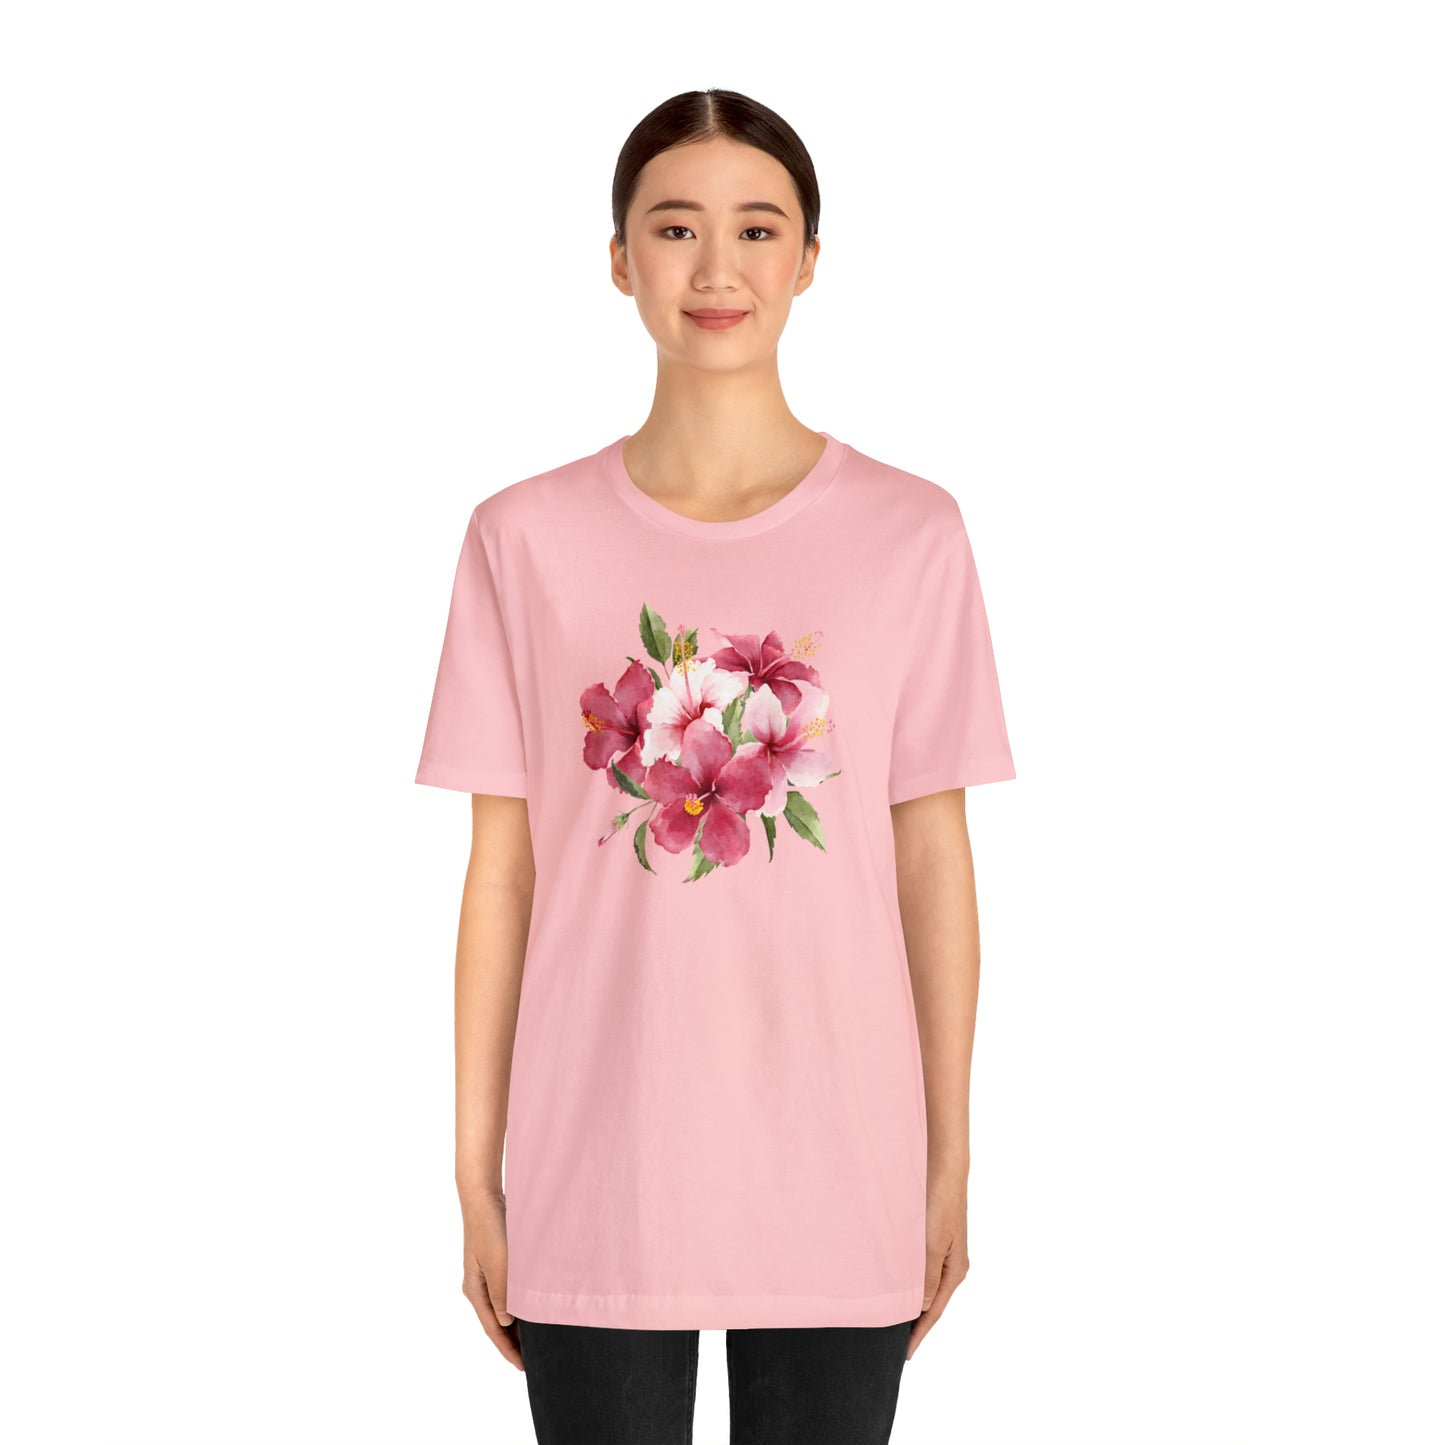 Mock up of a petite woman wearing the Pink shirt